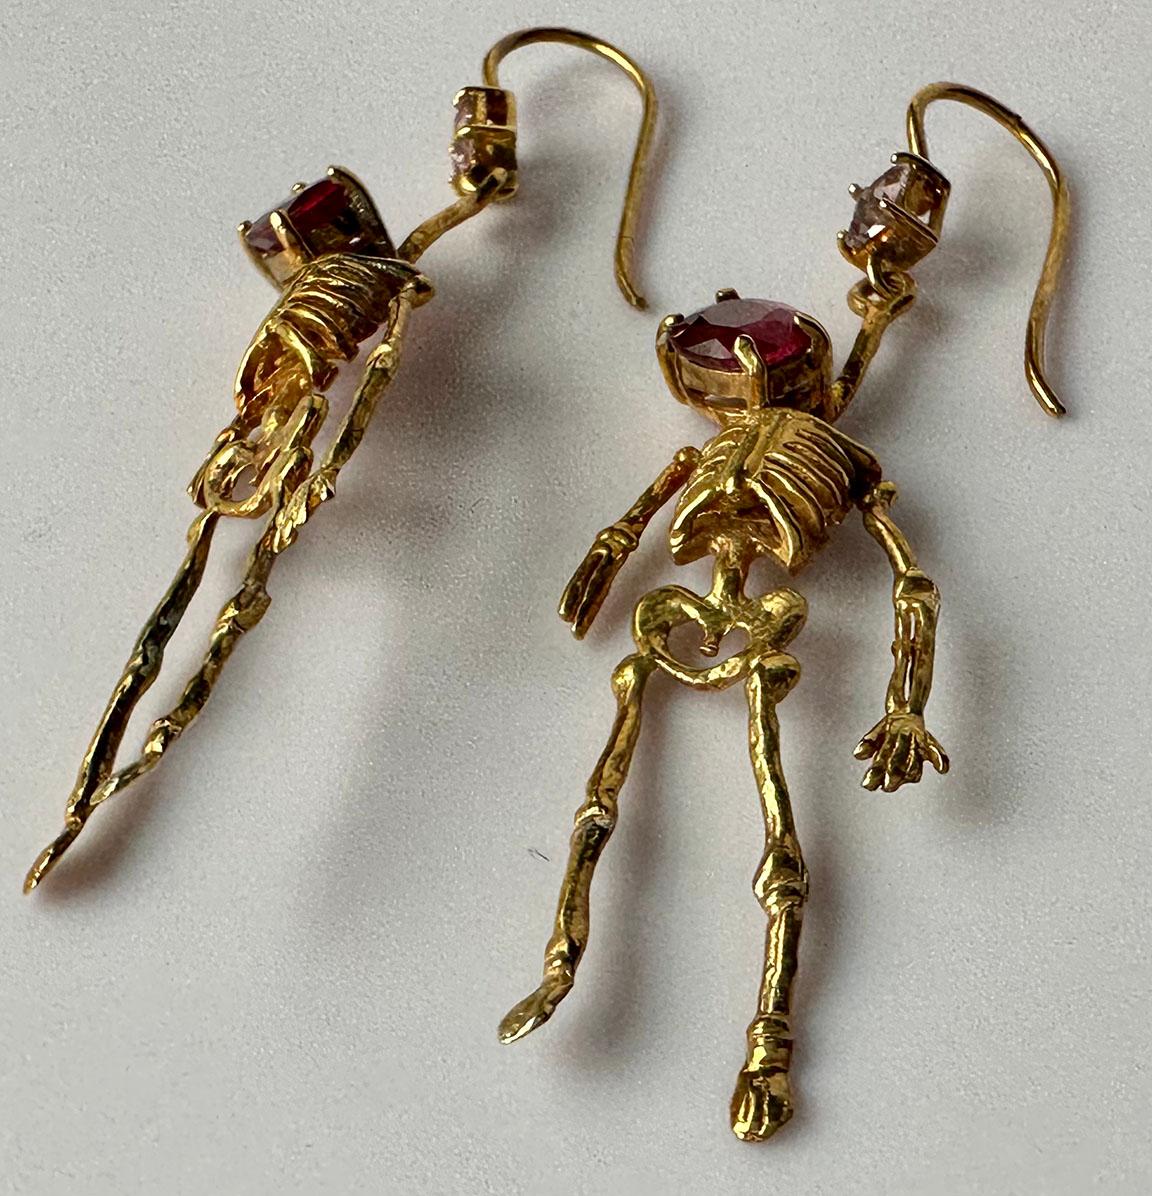 Silver Skeleton Earrings set with Ruby and Tourmaline For Sale 12